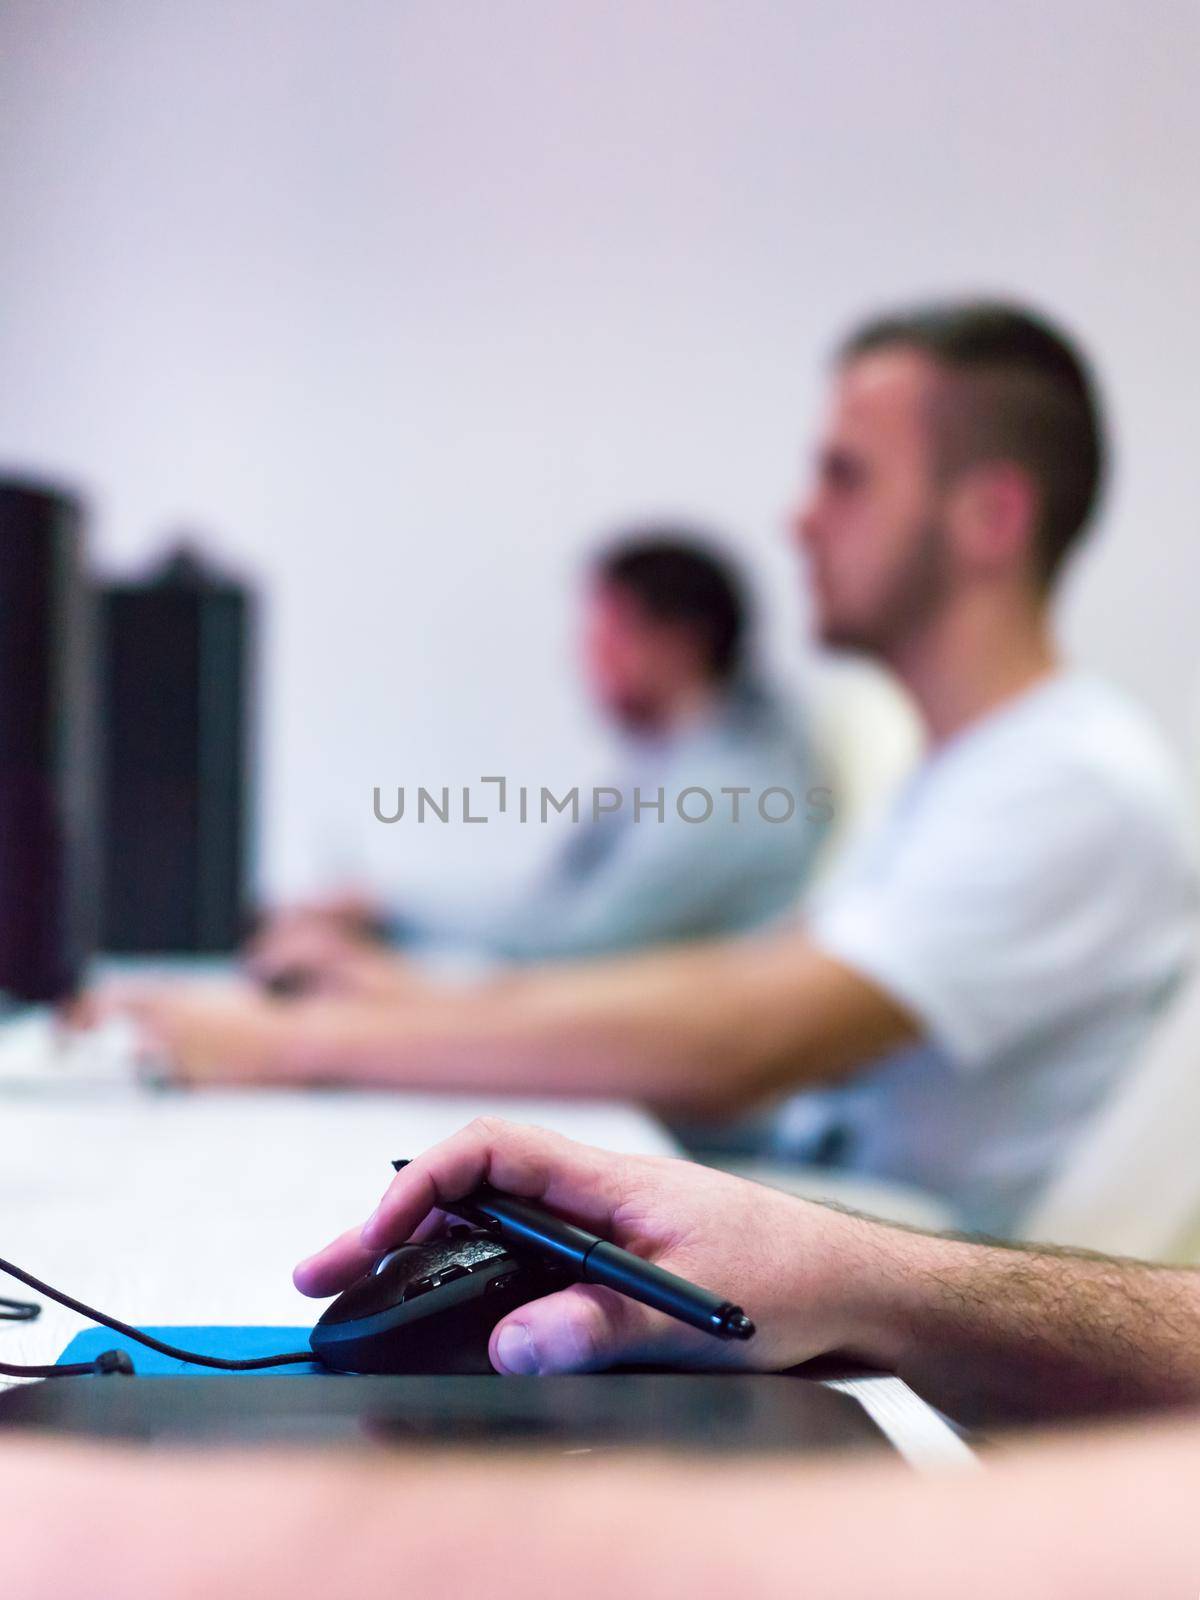 Closeup of Graphic Designer Working at Workplace. Guy Sitting at Table Retouching Photo Using Digital Tablet with Pen and desktop computer Indoors. Freelancing and Distance Job Concept